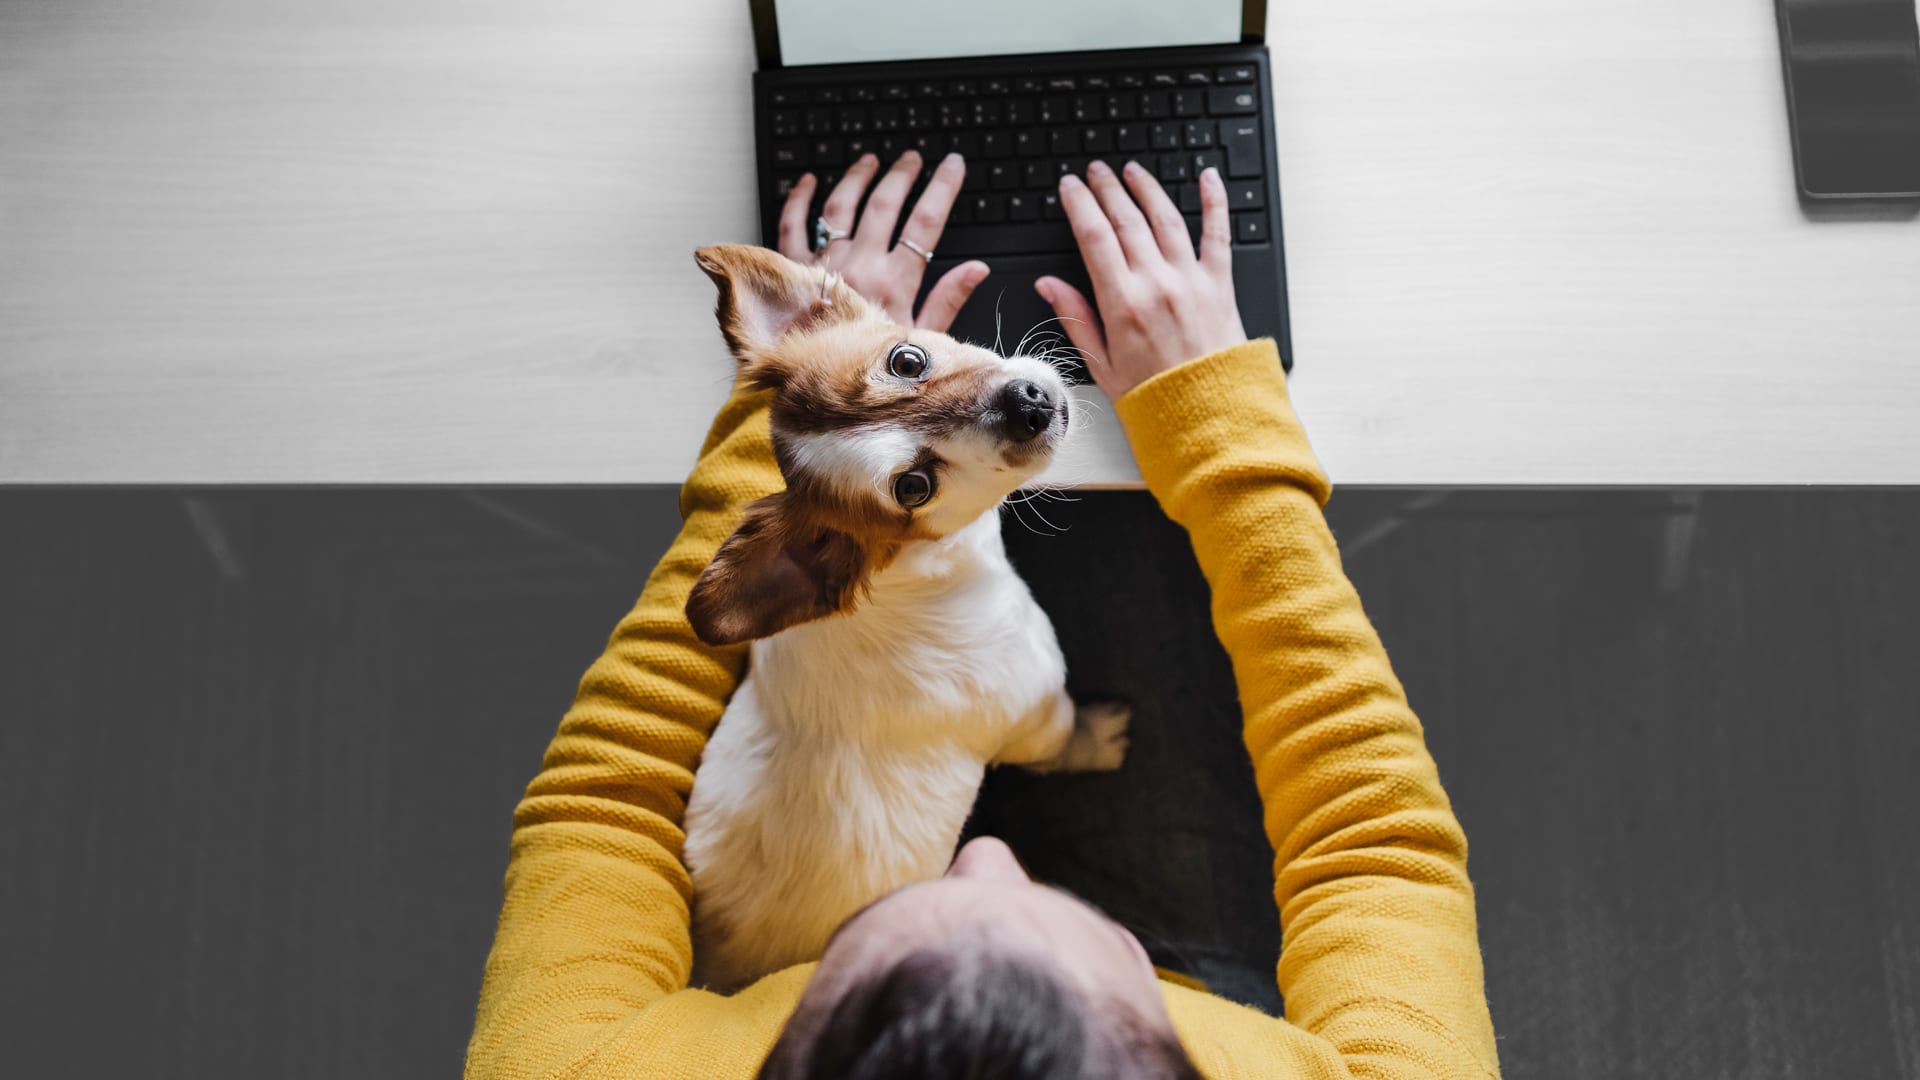 Looking to battle remote work isolation? Get a dog